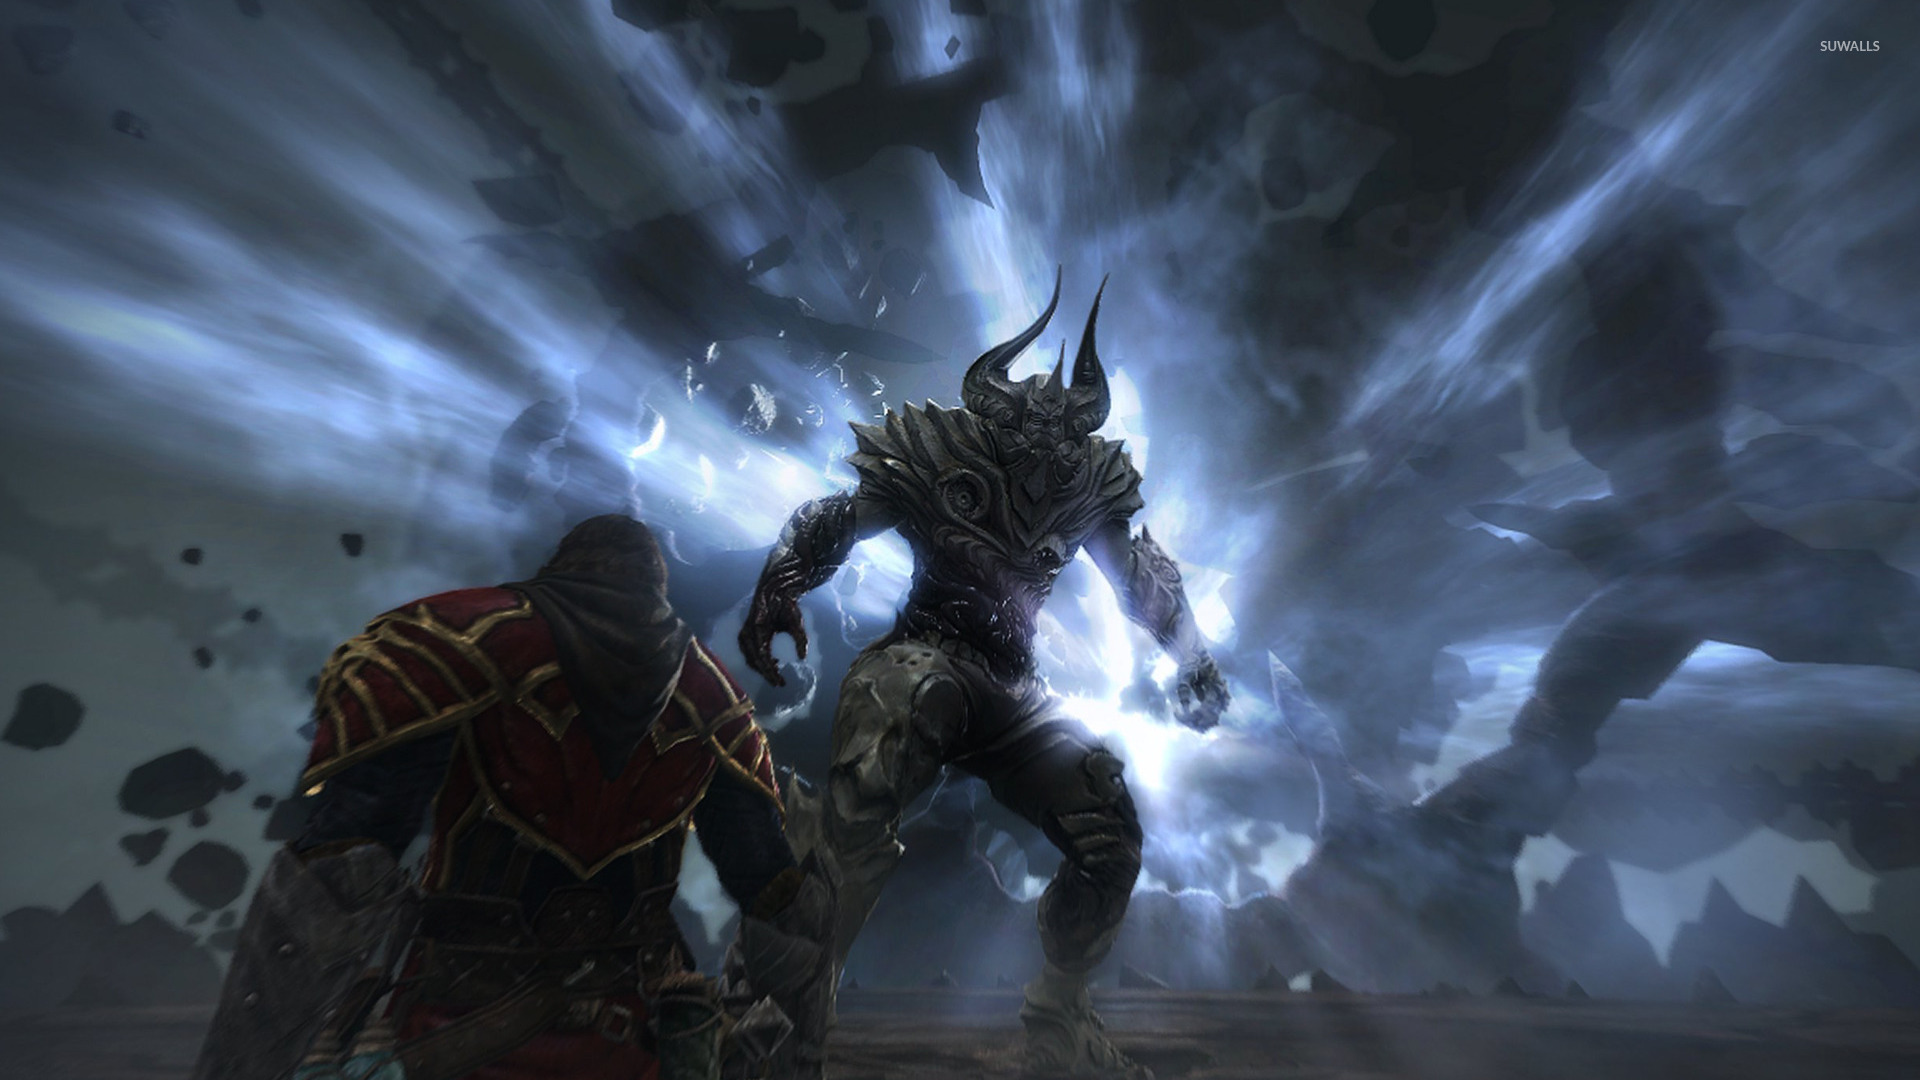 castlevania lords of shadow 2 wallpaper,action adventure game,pc game,cg artwork,demon,adventure game